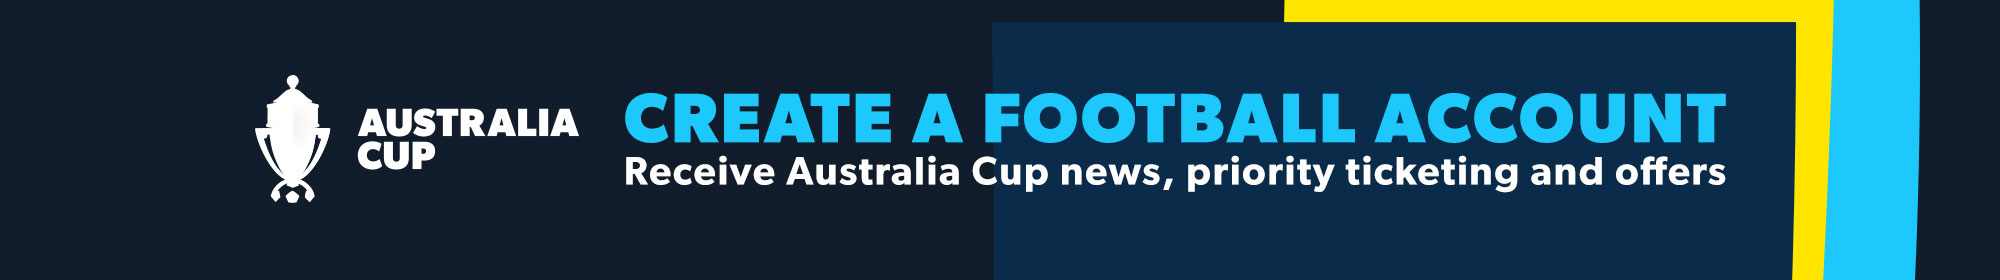 Australia Cup - Create a Football Account to stay up to date